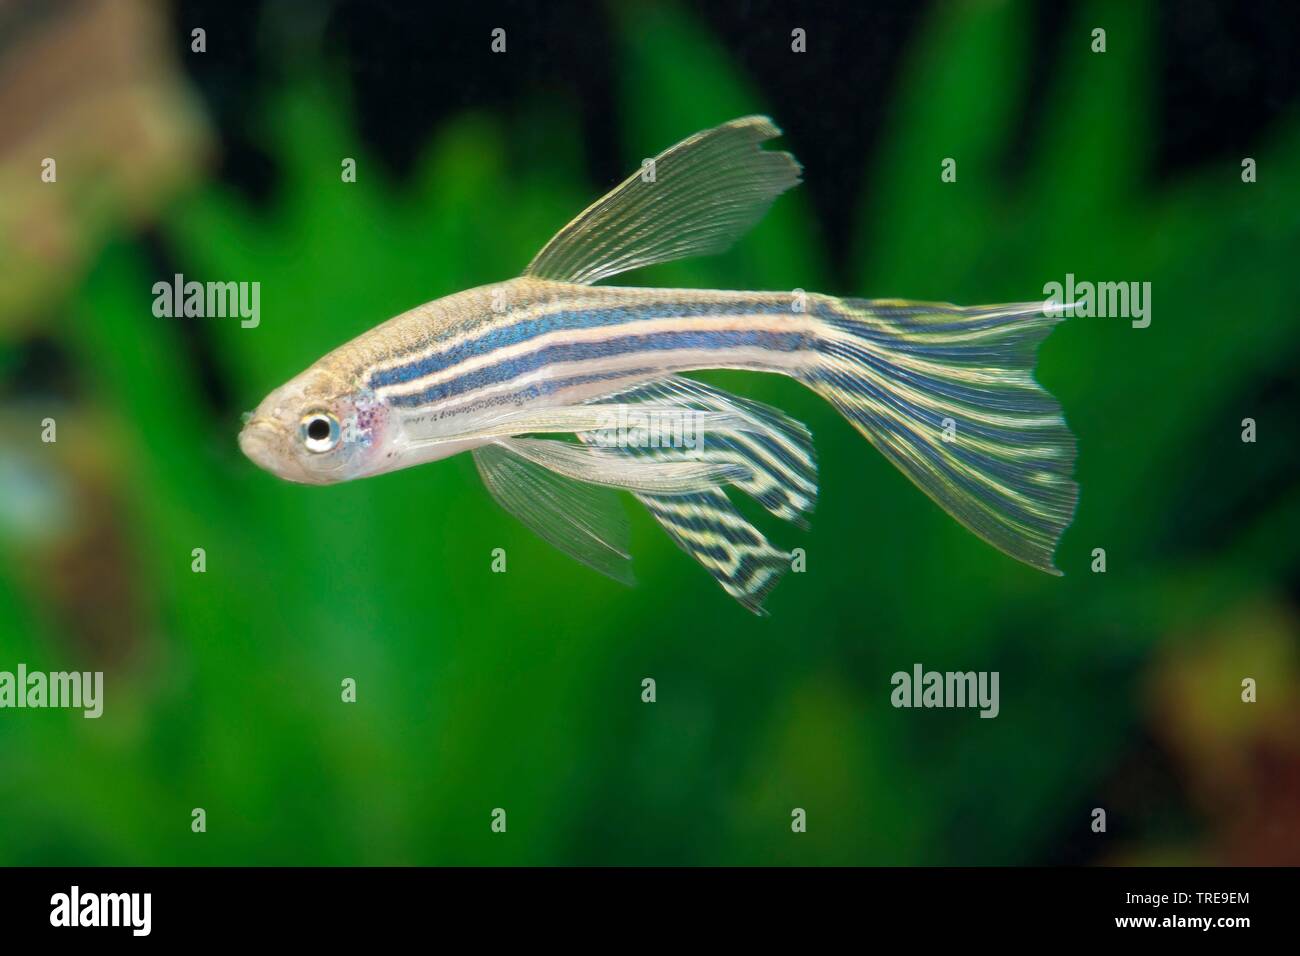 Zebra Danio High Resolution Stock Photography And Images Alamy,Country Ribs In Oven Fast